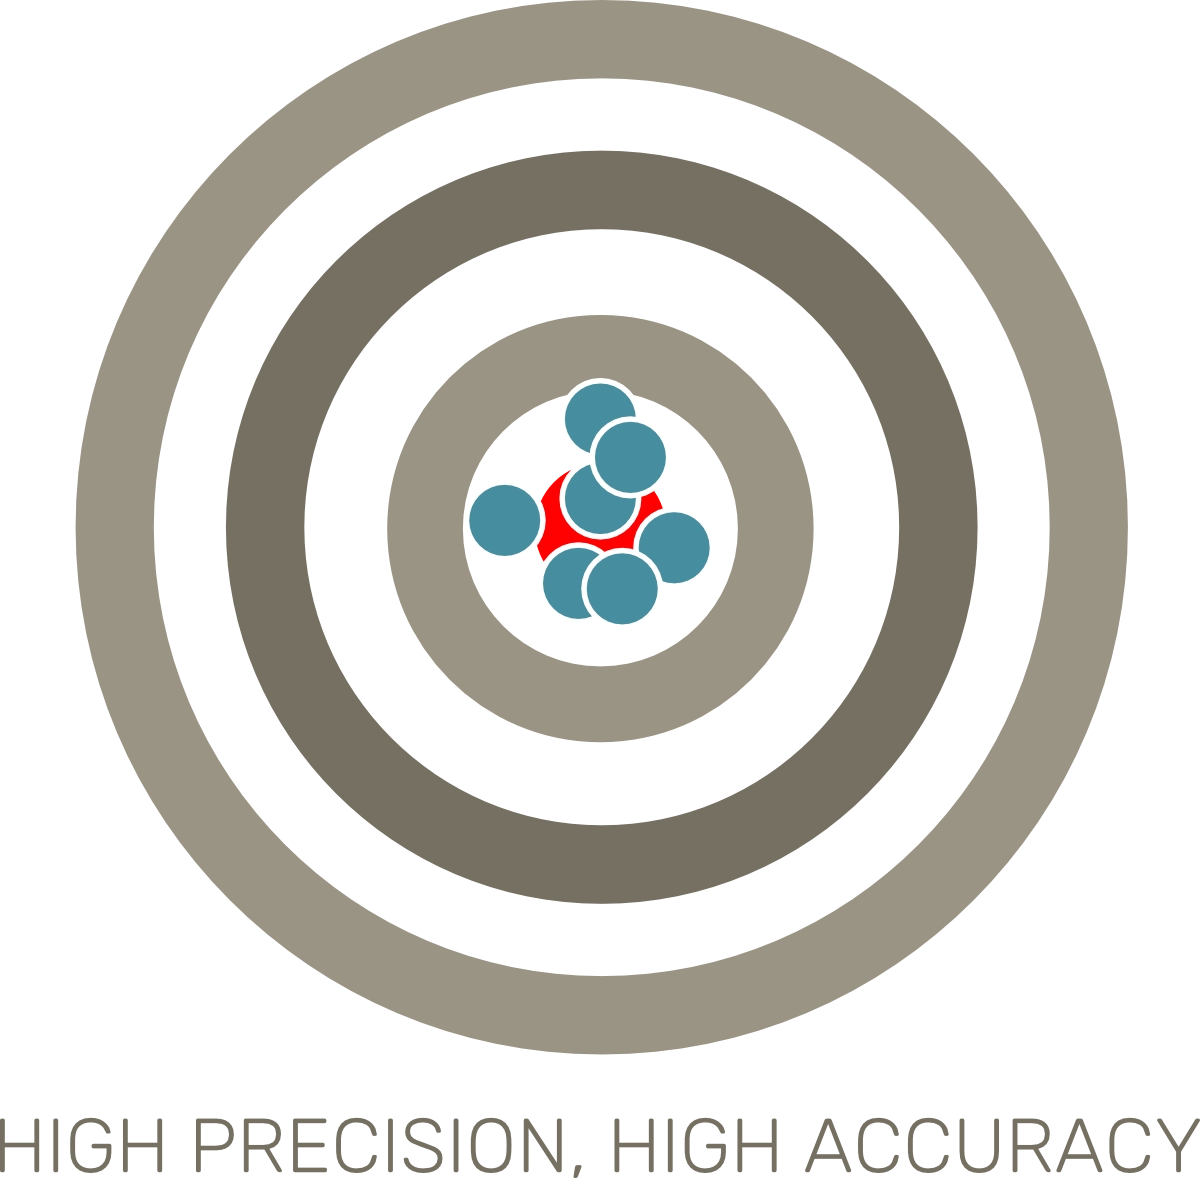 High precision and high accuracy